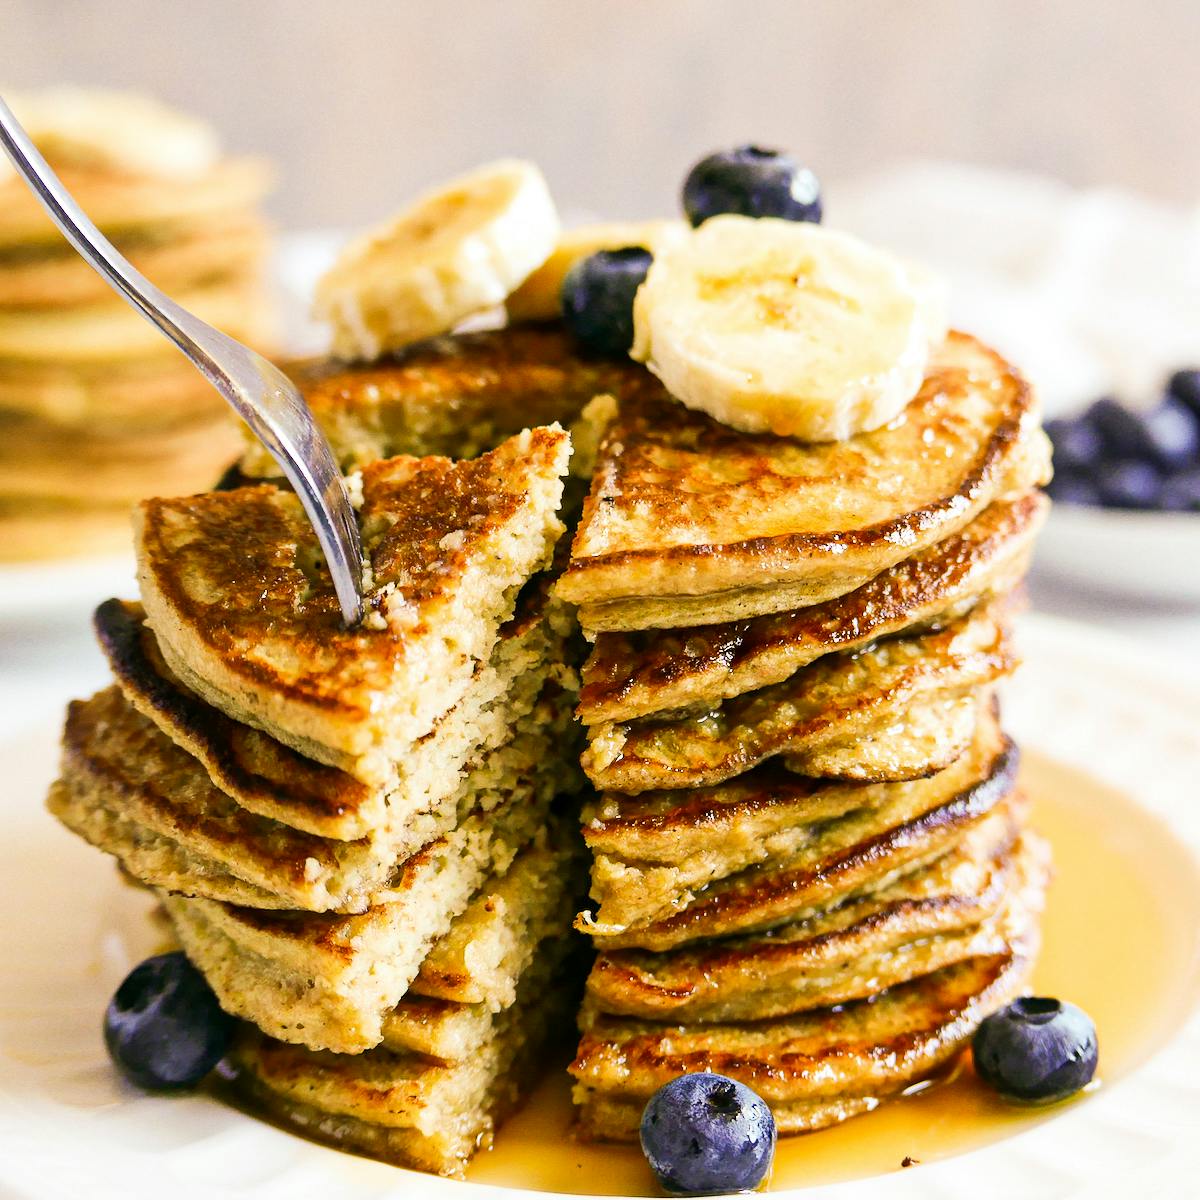 Stack of banana oat pancakes on a plate with syrup.